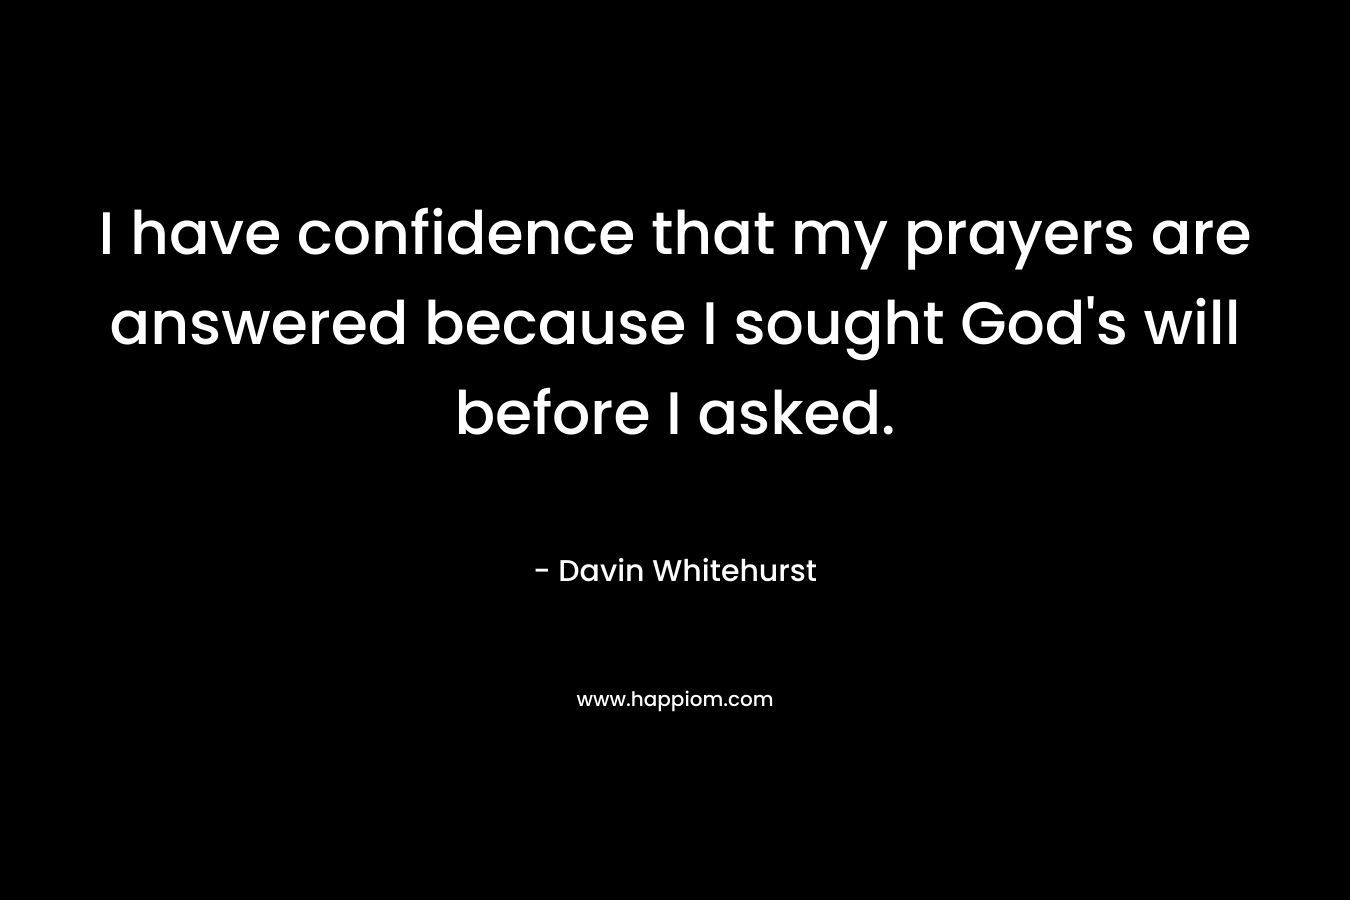 I have confidence that my prayers are answered because I sought God’s will before I asked. – Davin Whitehurst